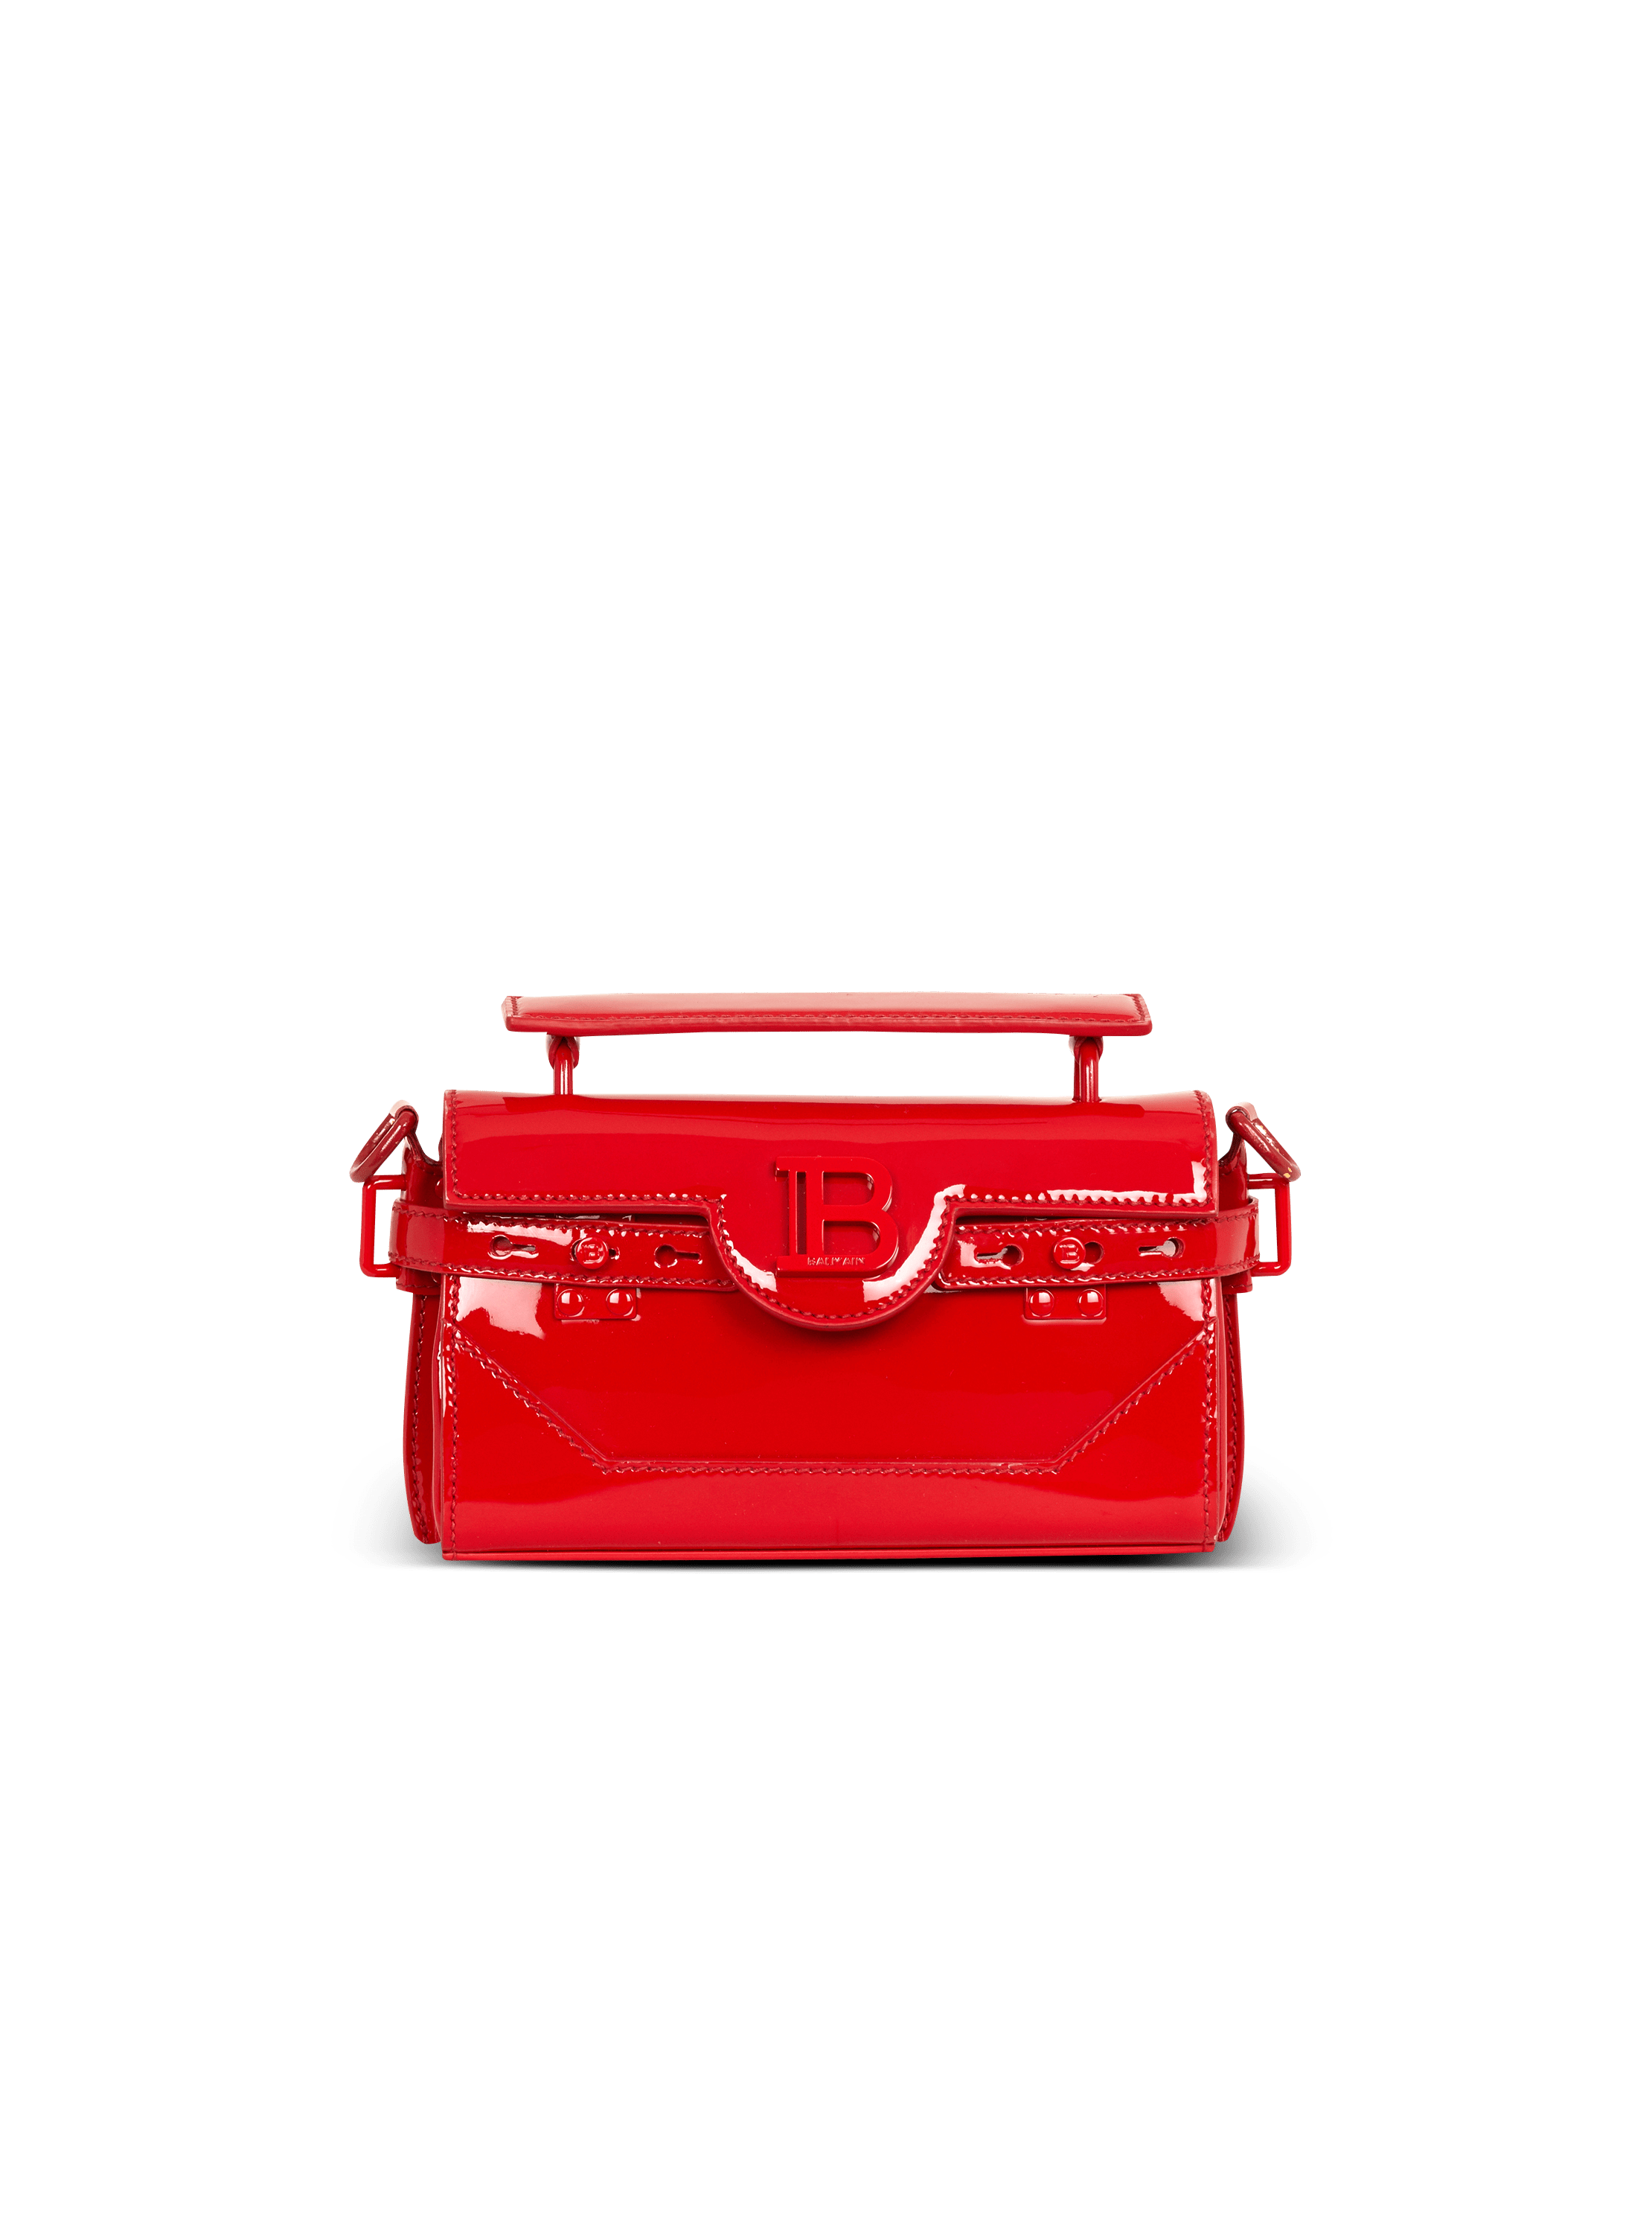 B-Buzz 19 patent leather bag red - Women